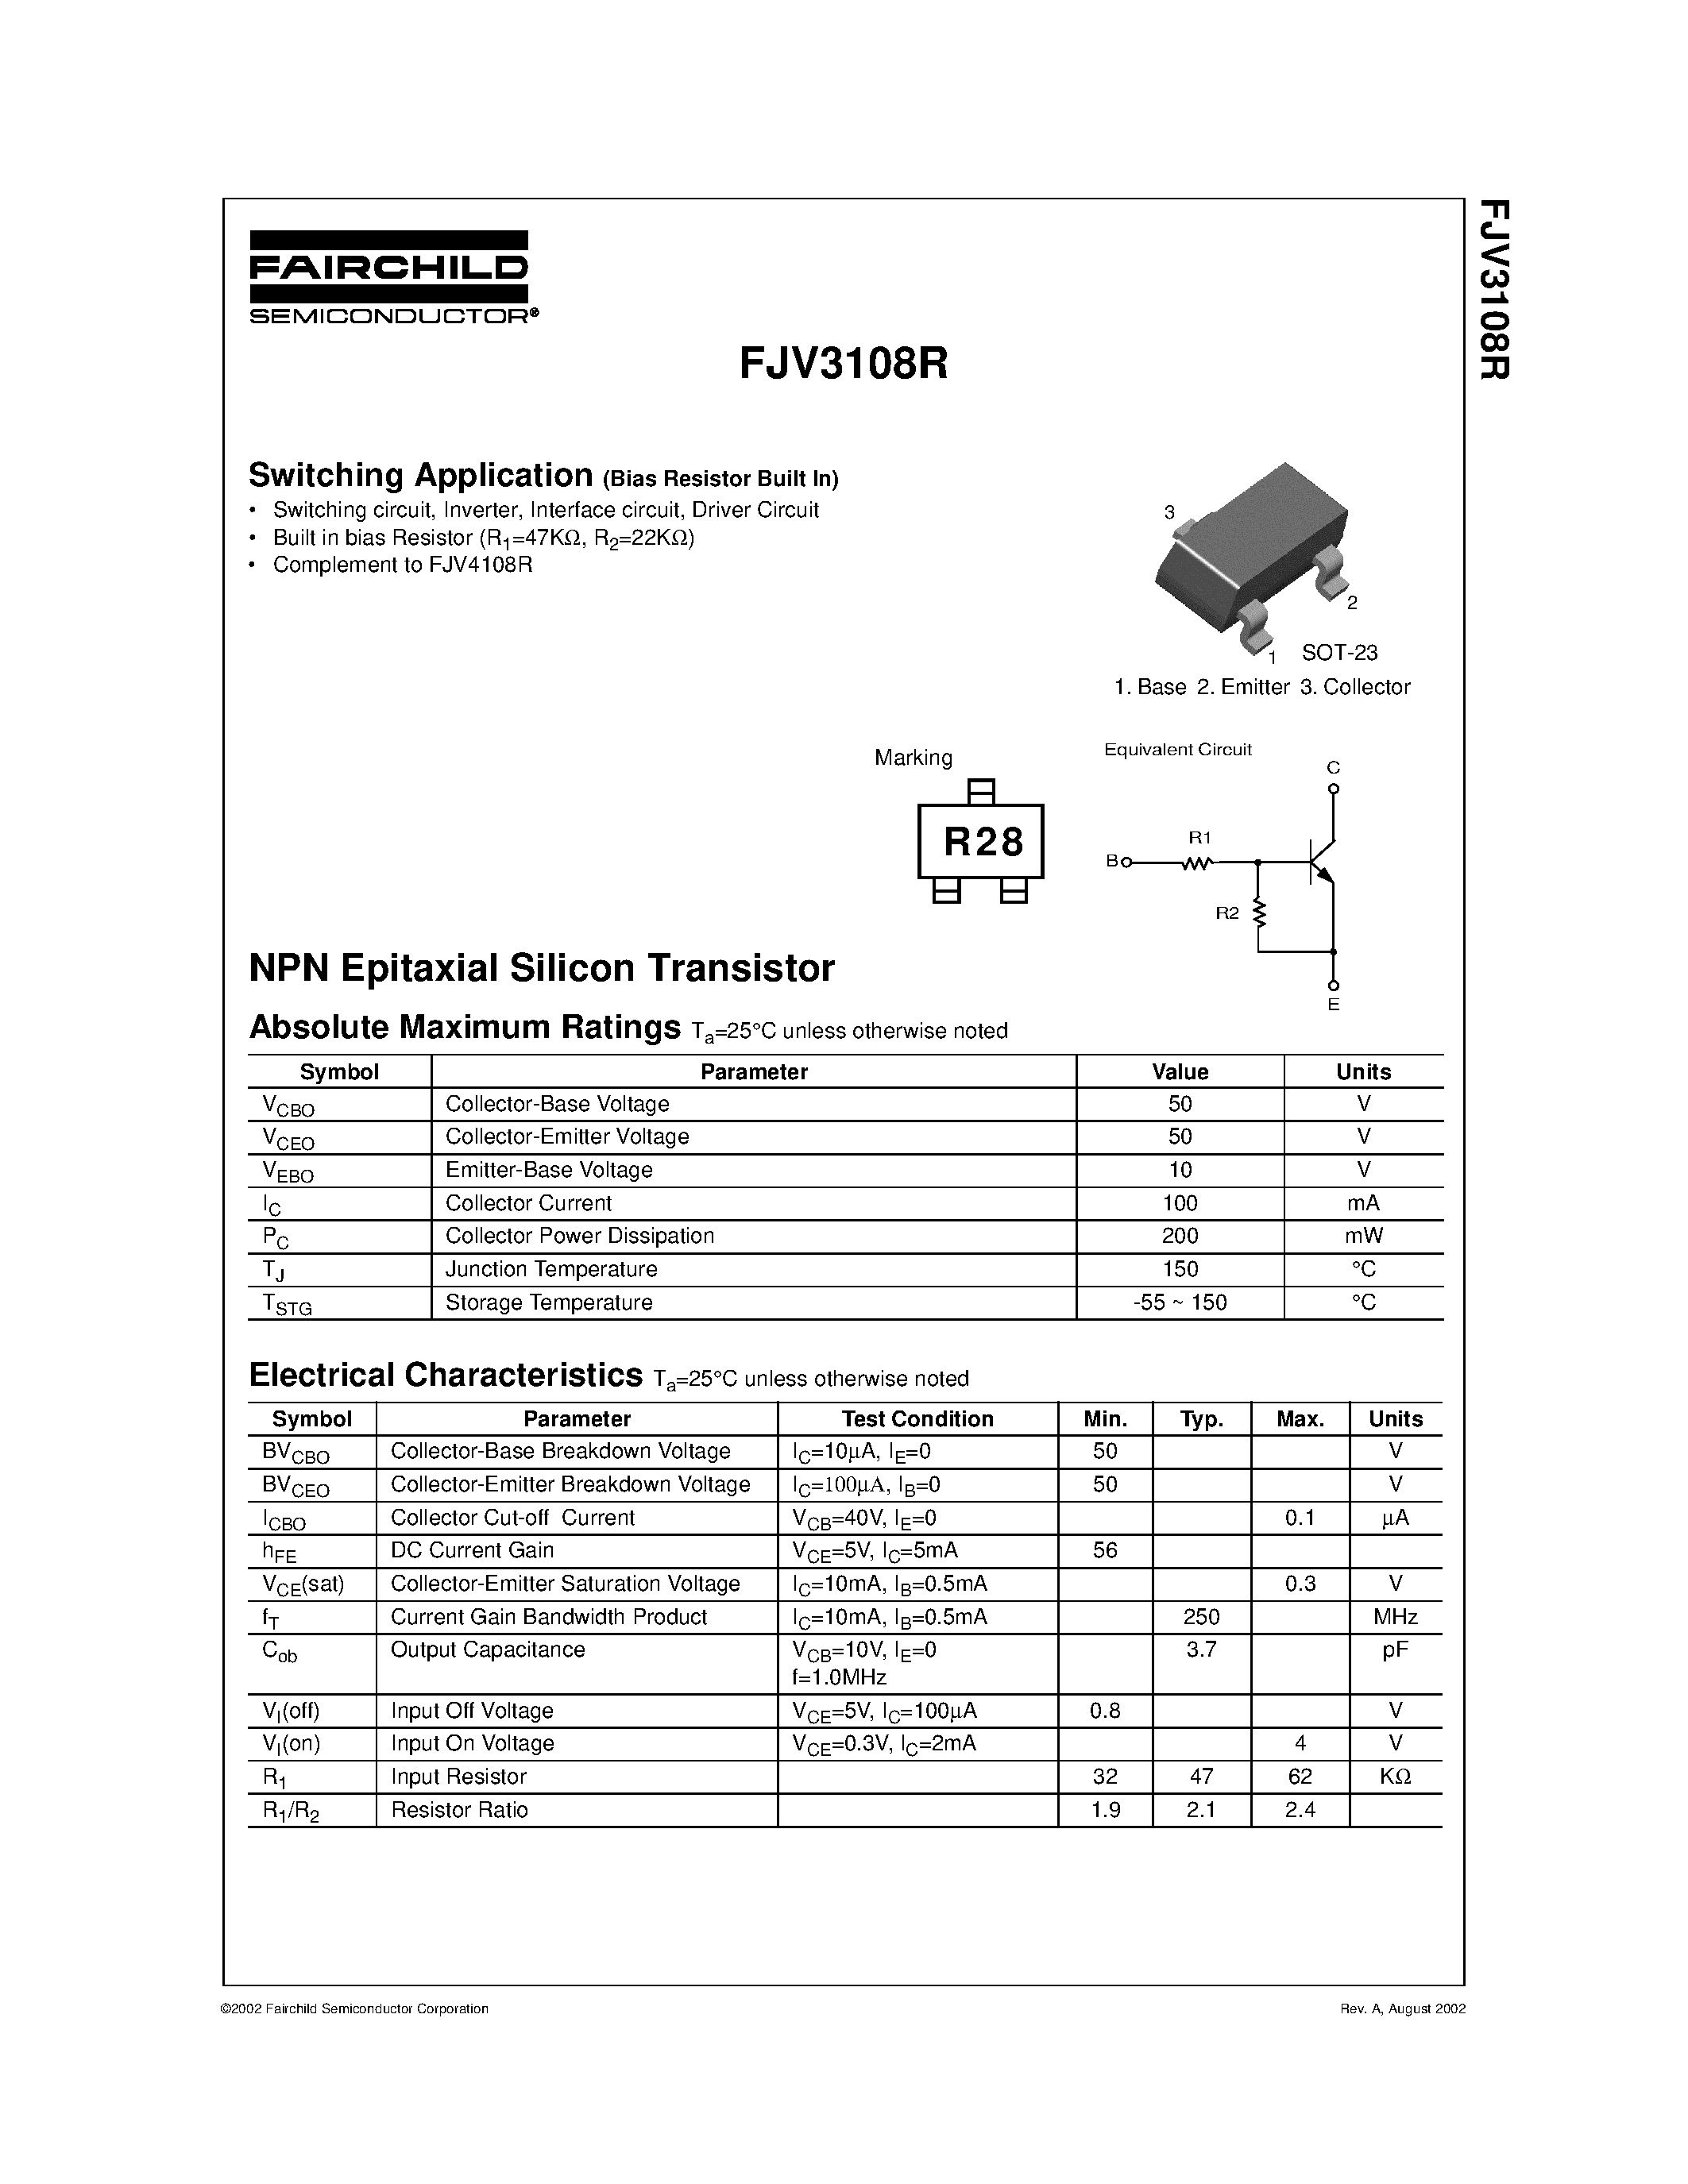 Datasheet FJV3108R - NPN Epitaxial Silicon Transistor page 1